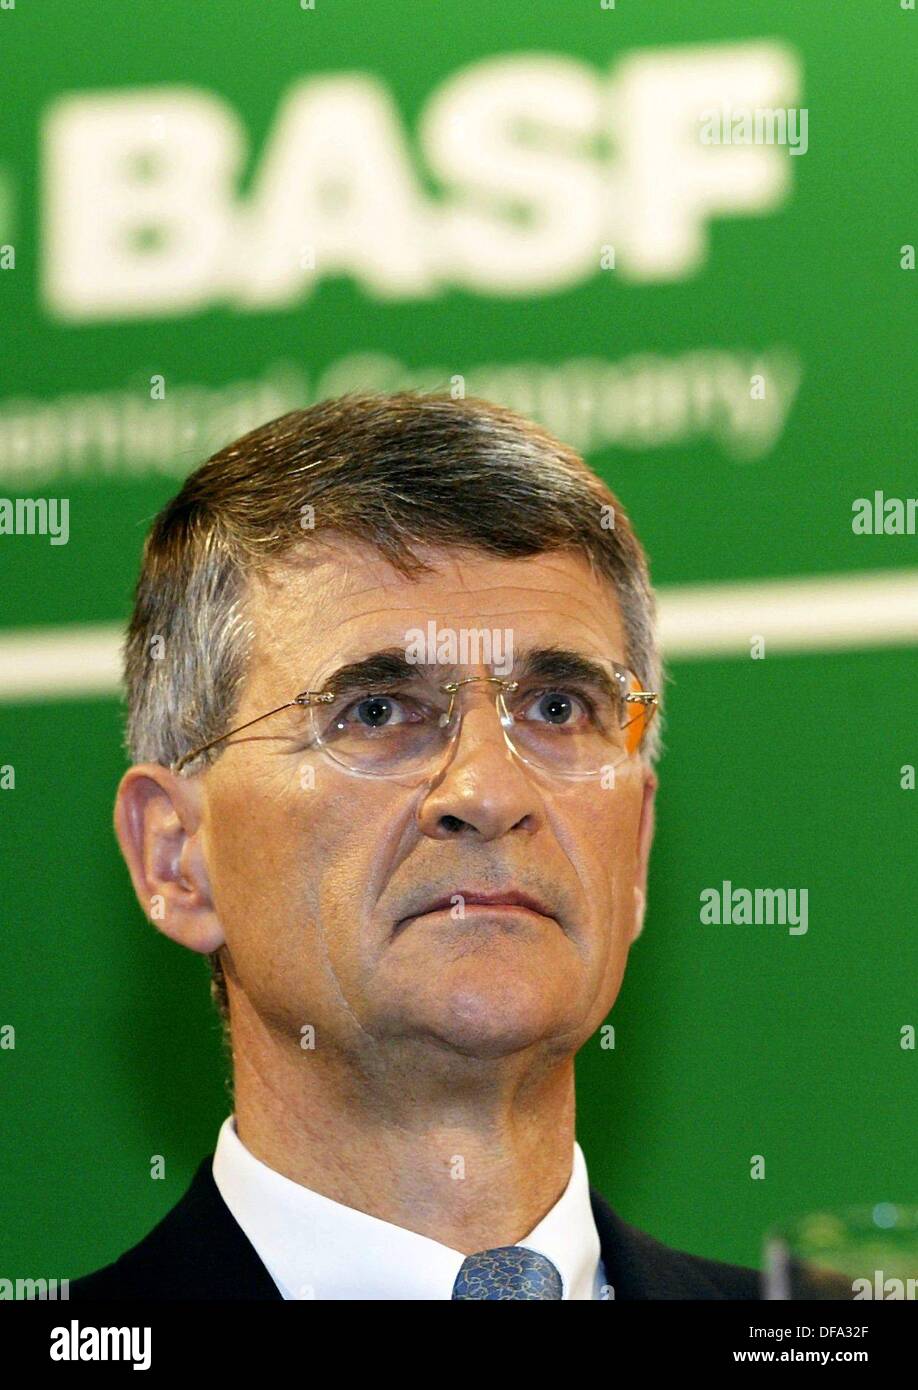 The chief executive of the BASF, Jürgen Hambrecht, is standing in front of the new logo of the company during a press conference in Ludwigshafen on 10 December 2003. Stock Photo